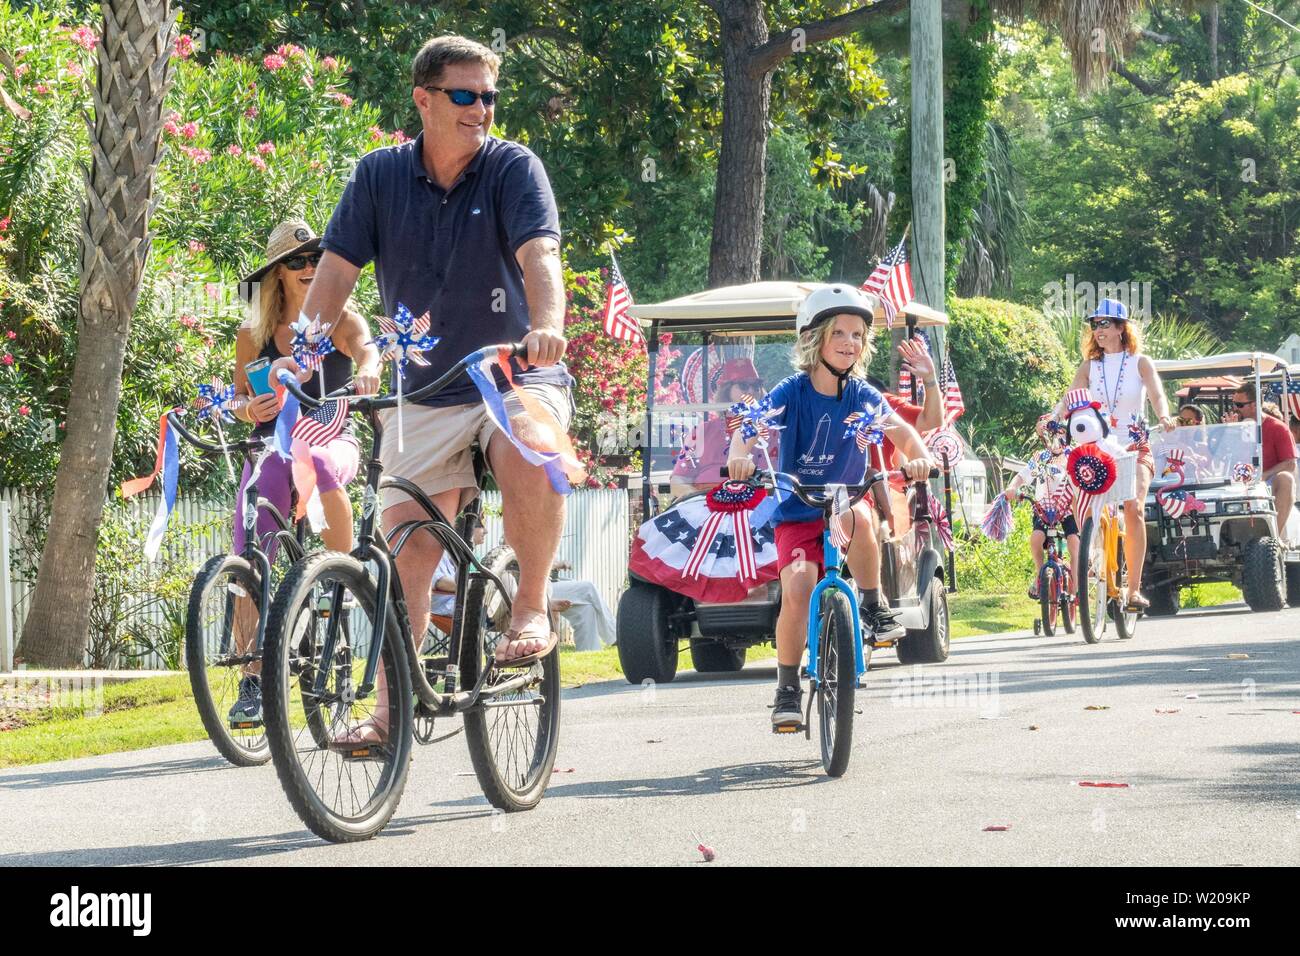 Sullivans Island South Carolina, USA. 4th July, 2019. Families take part in the annual Independence Day golf cart and bicycle parade July 4, 2019 in Sullivan's Island, South Carolina. The tiny affluent Sea Island beach community across from Charleston holds an outsized golf cart parade featuring more than 75 decorated carts. Credit: Planetpix/Alamy Live News Stock Photo